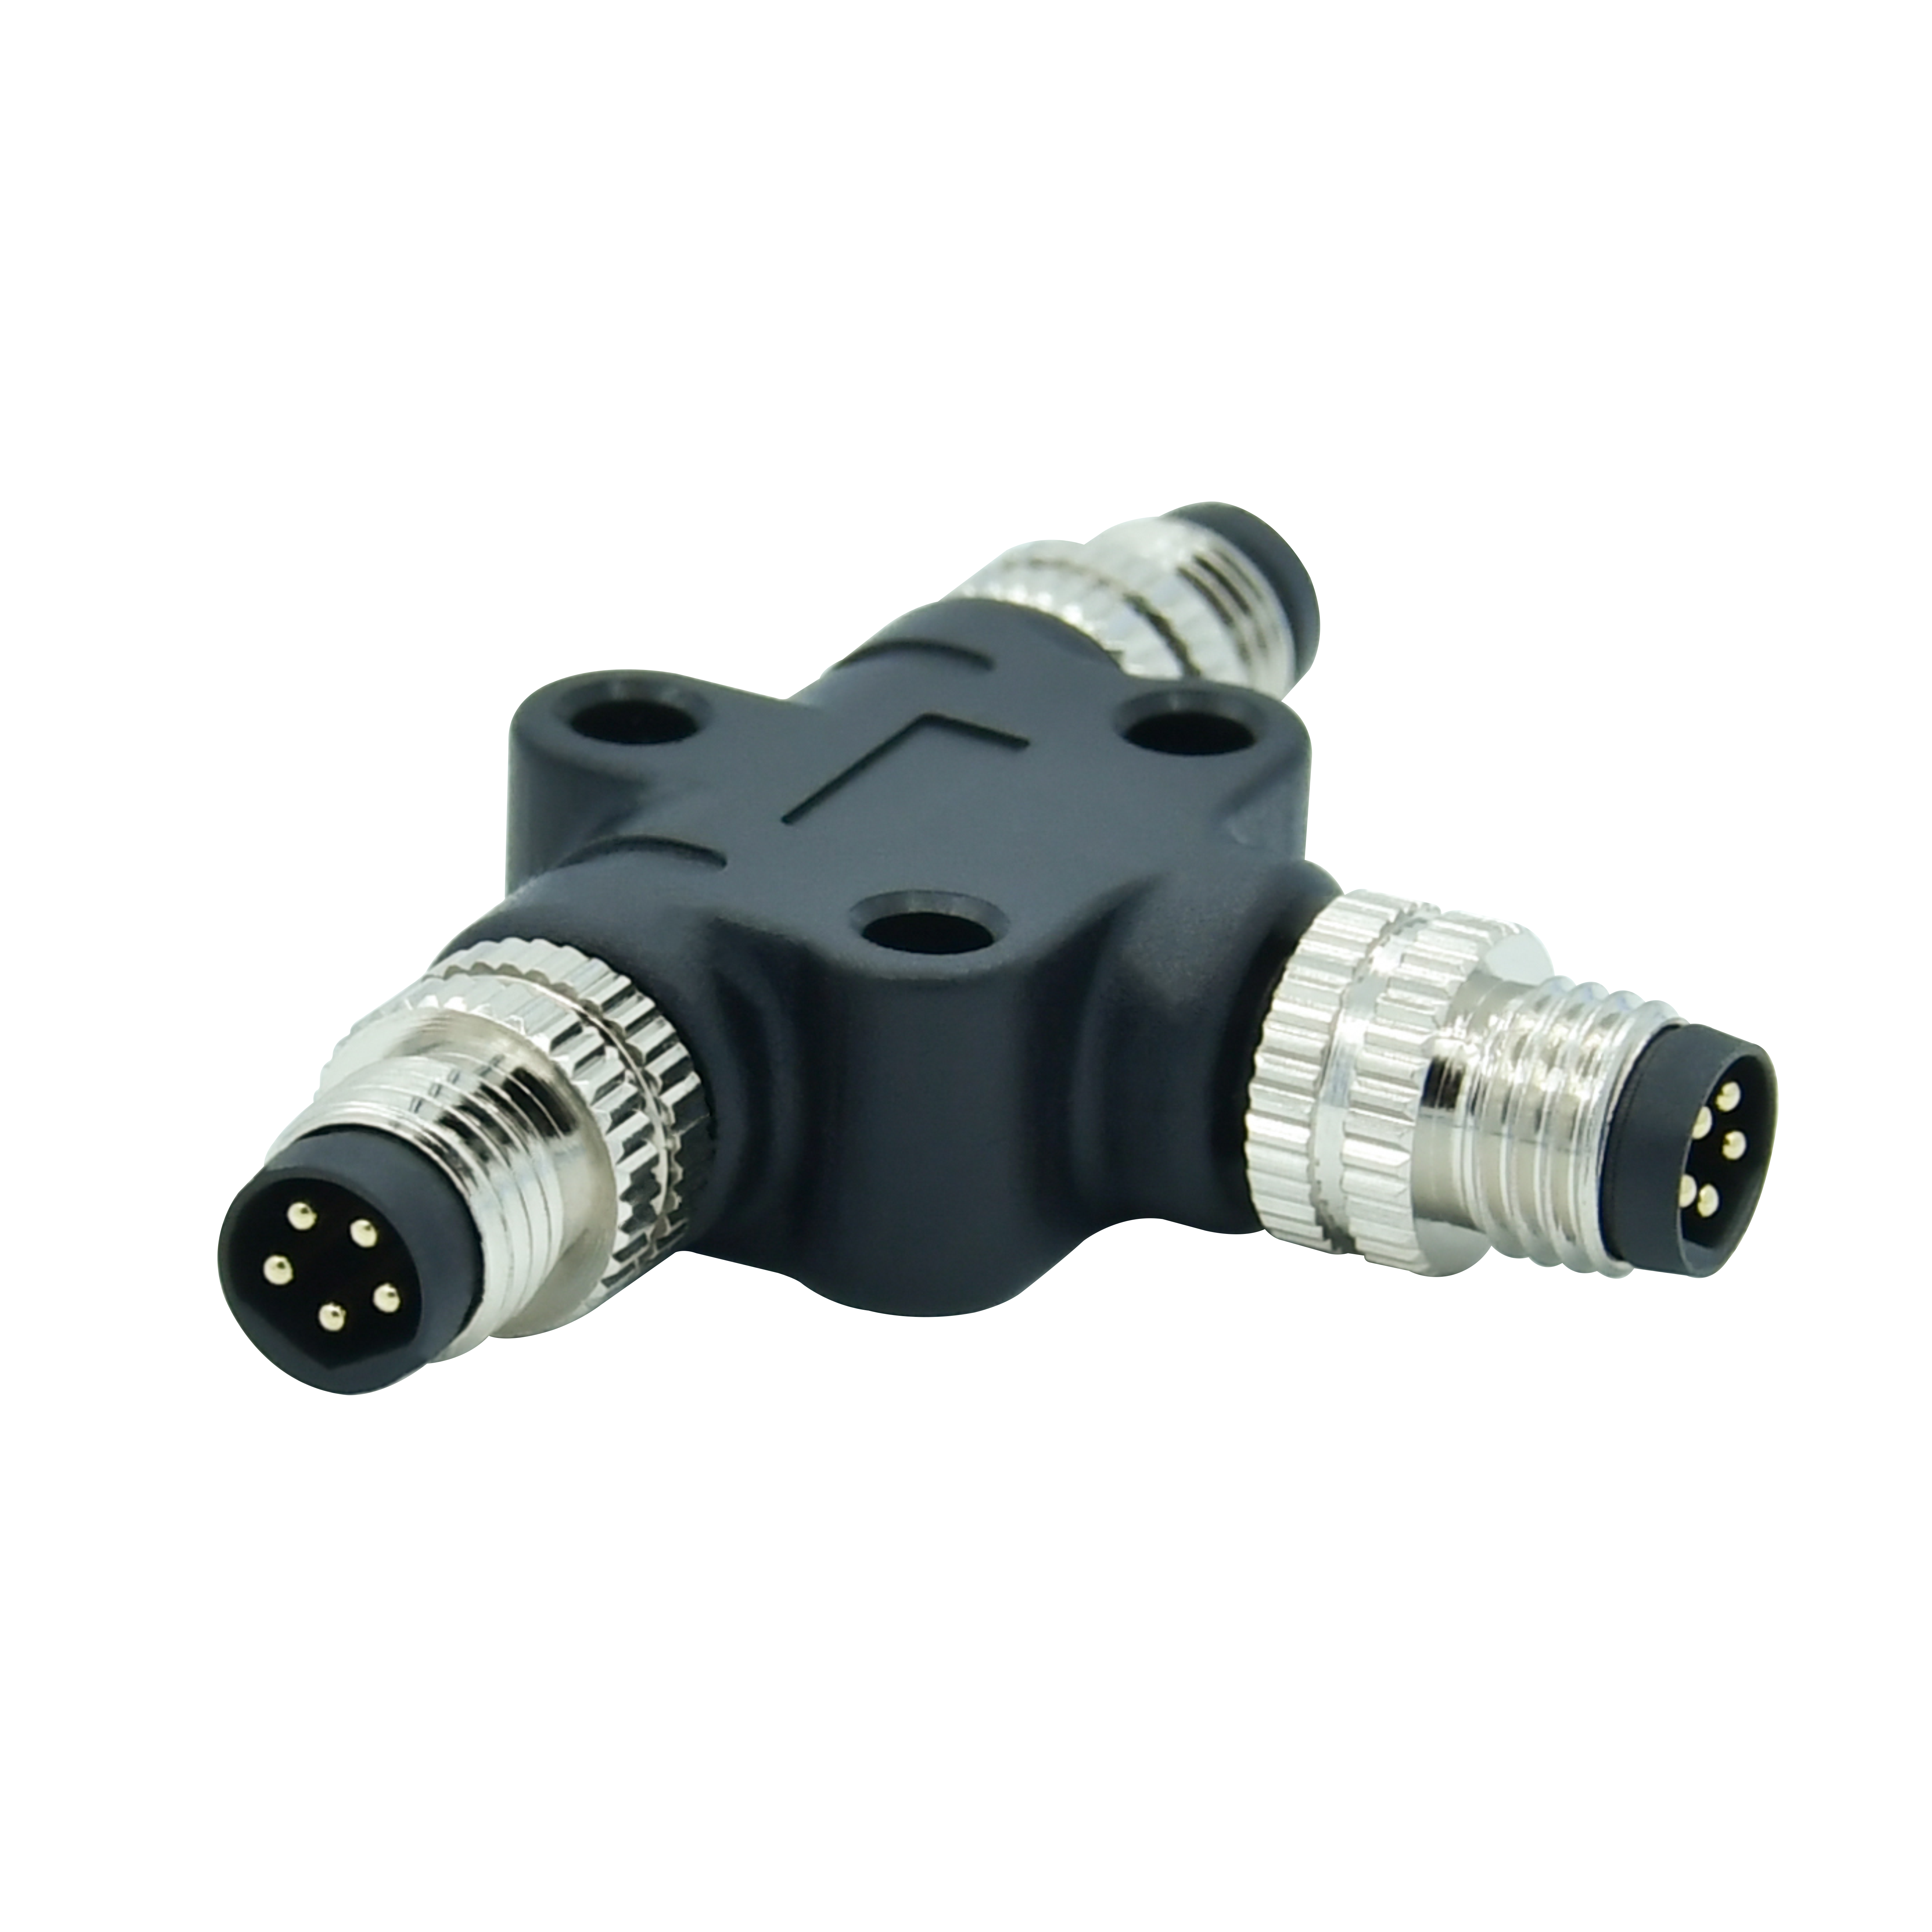 Rigoal M8 Connectors: Excellence in Industrial Connectivity